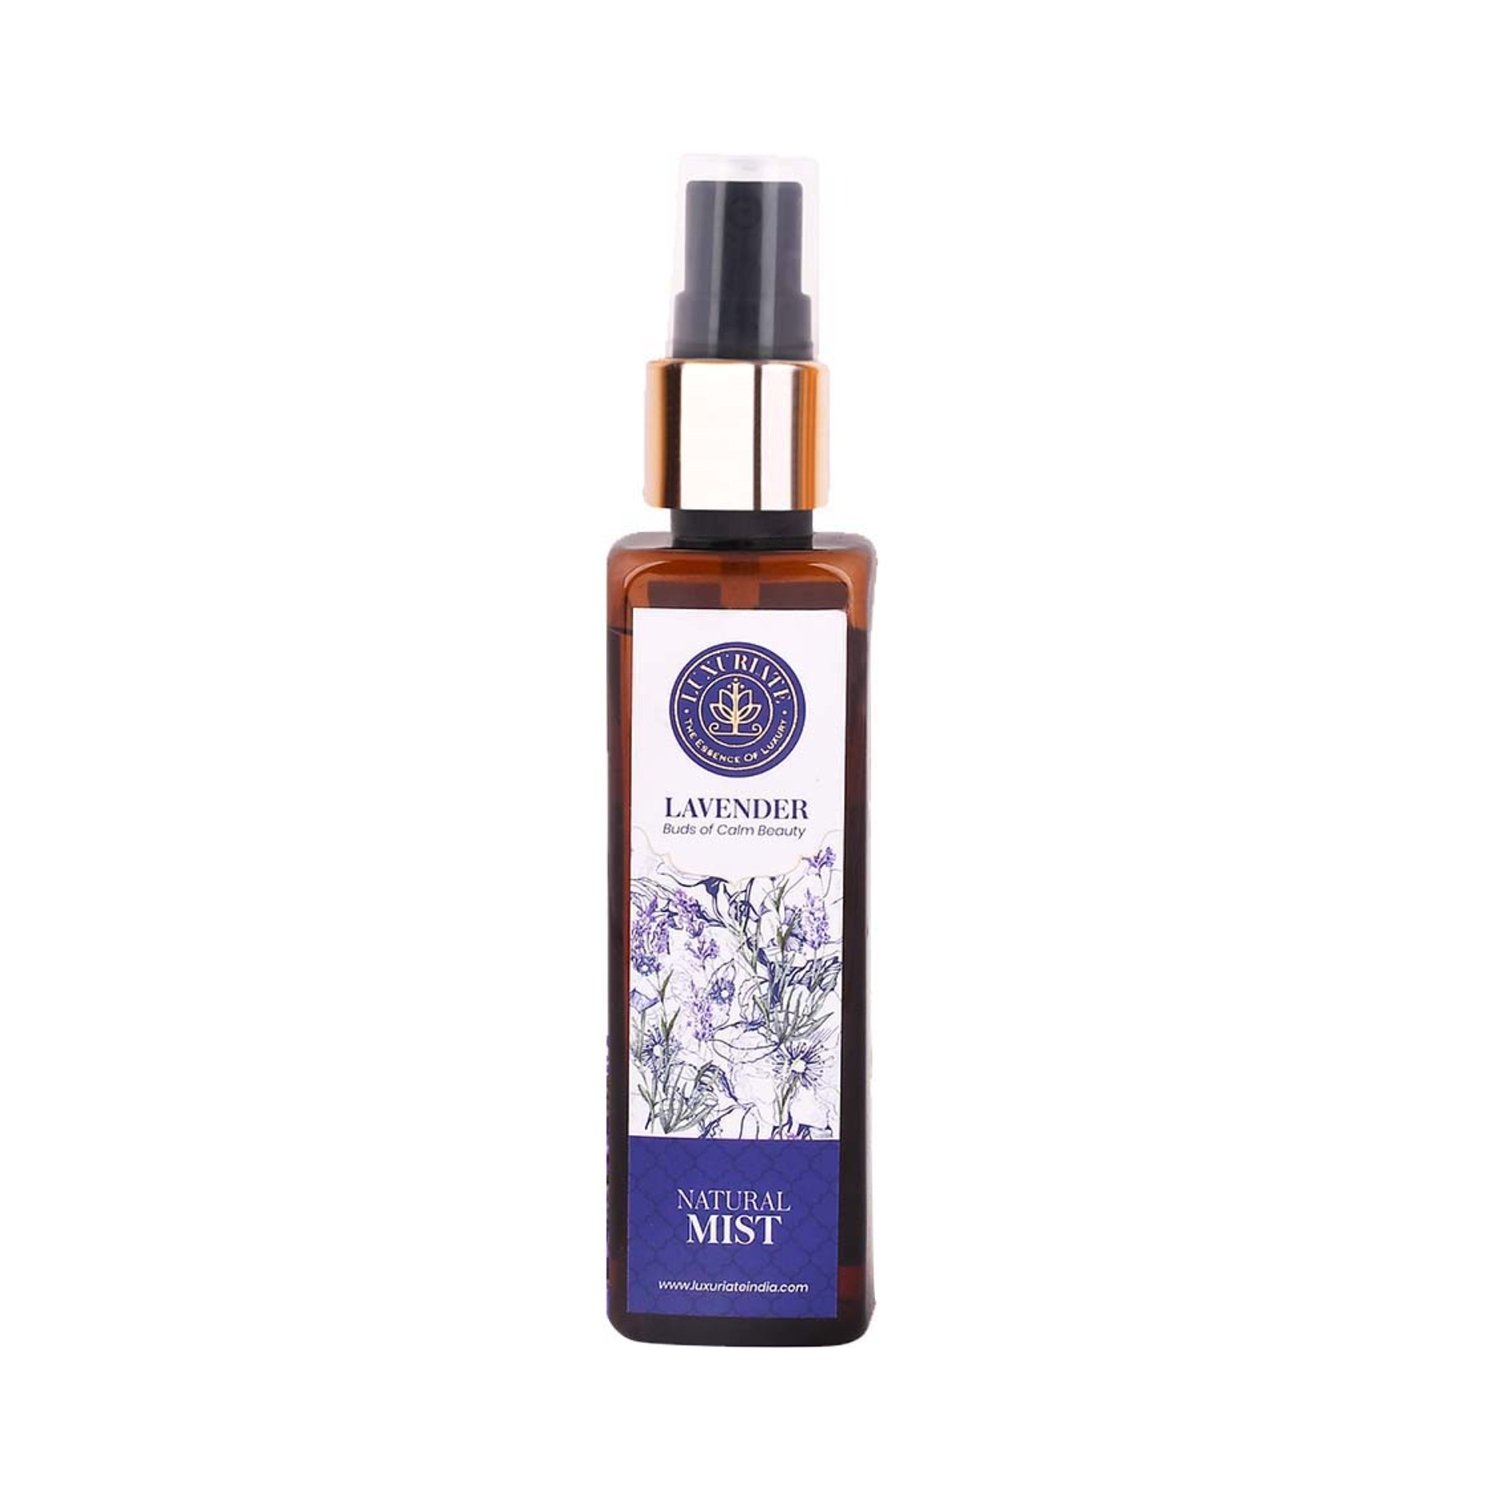 LUXURIATE Pure and Natural Body & Face Lavender Mist Spray (100ml)